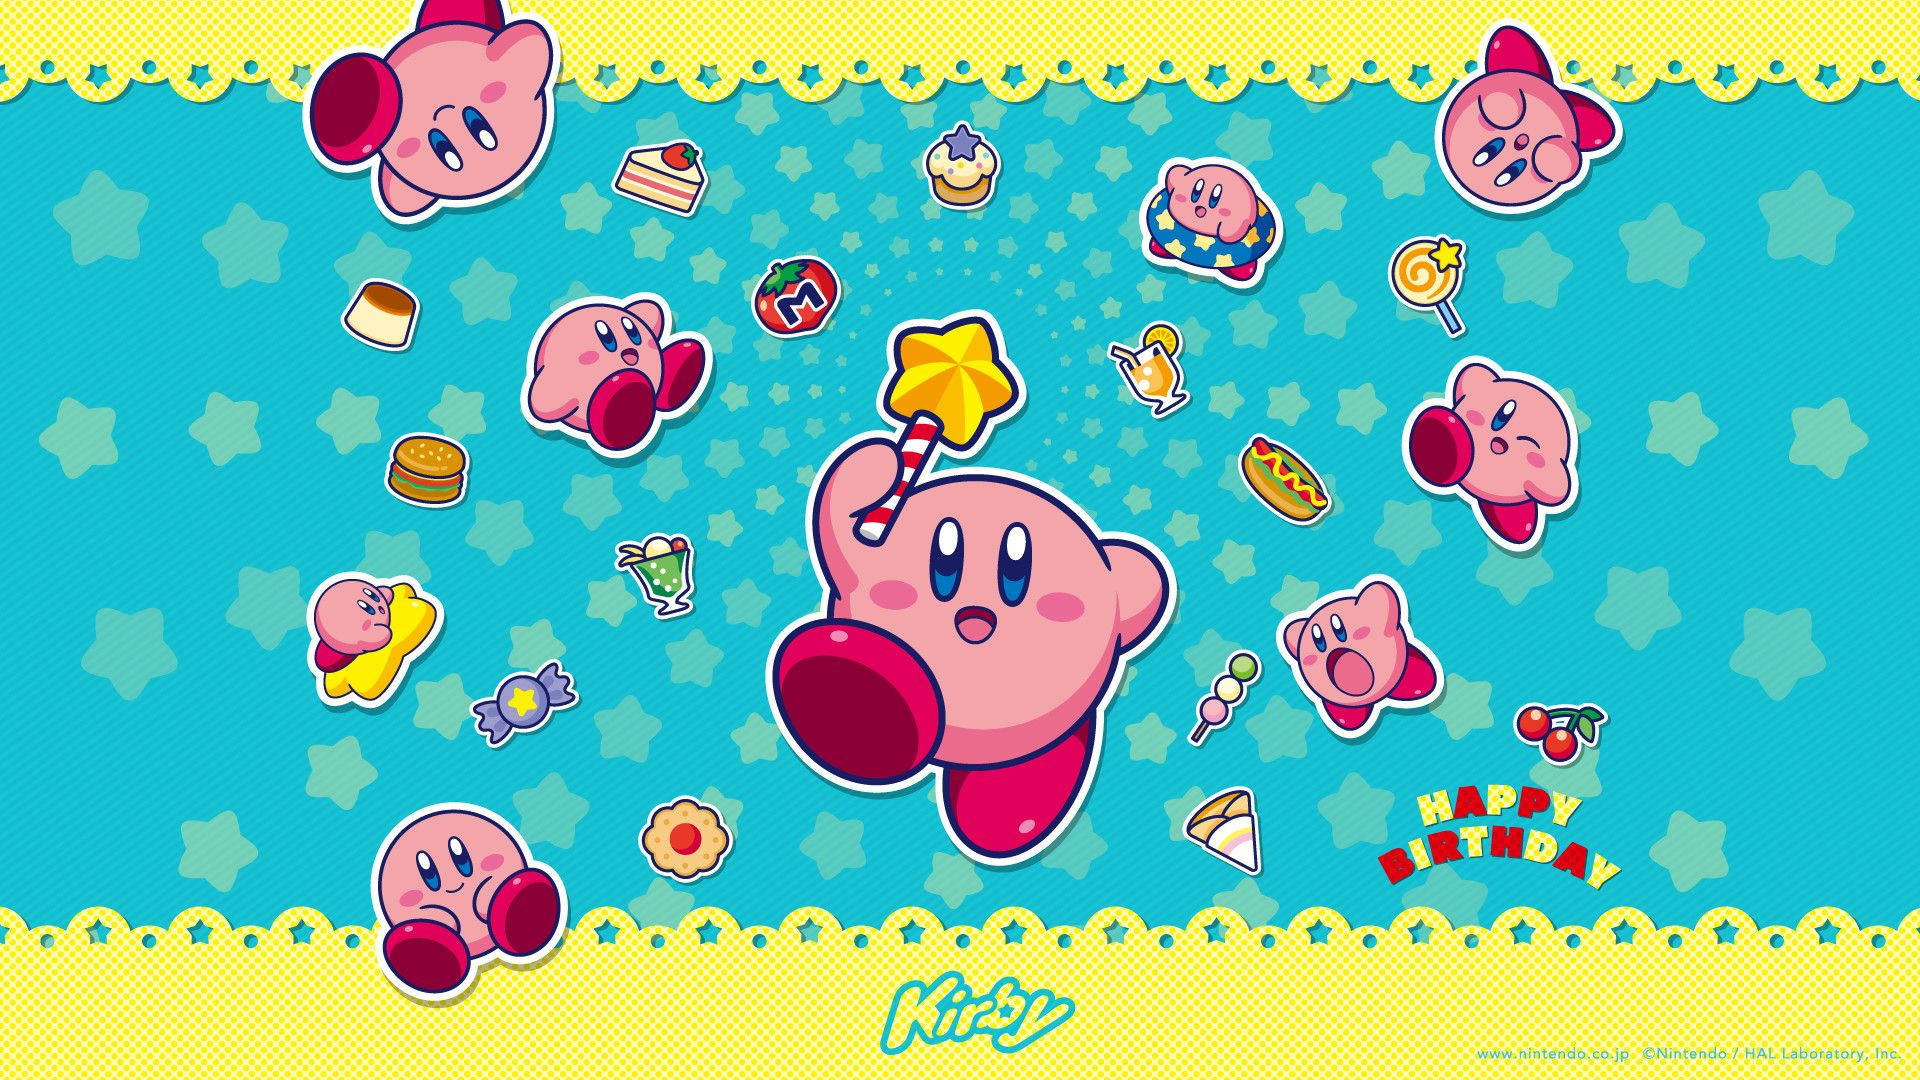 Top 999+ Kirby Wallpaper Full HD, 4K✅Free to Use